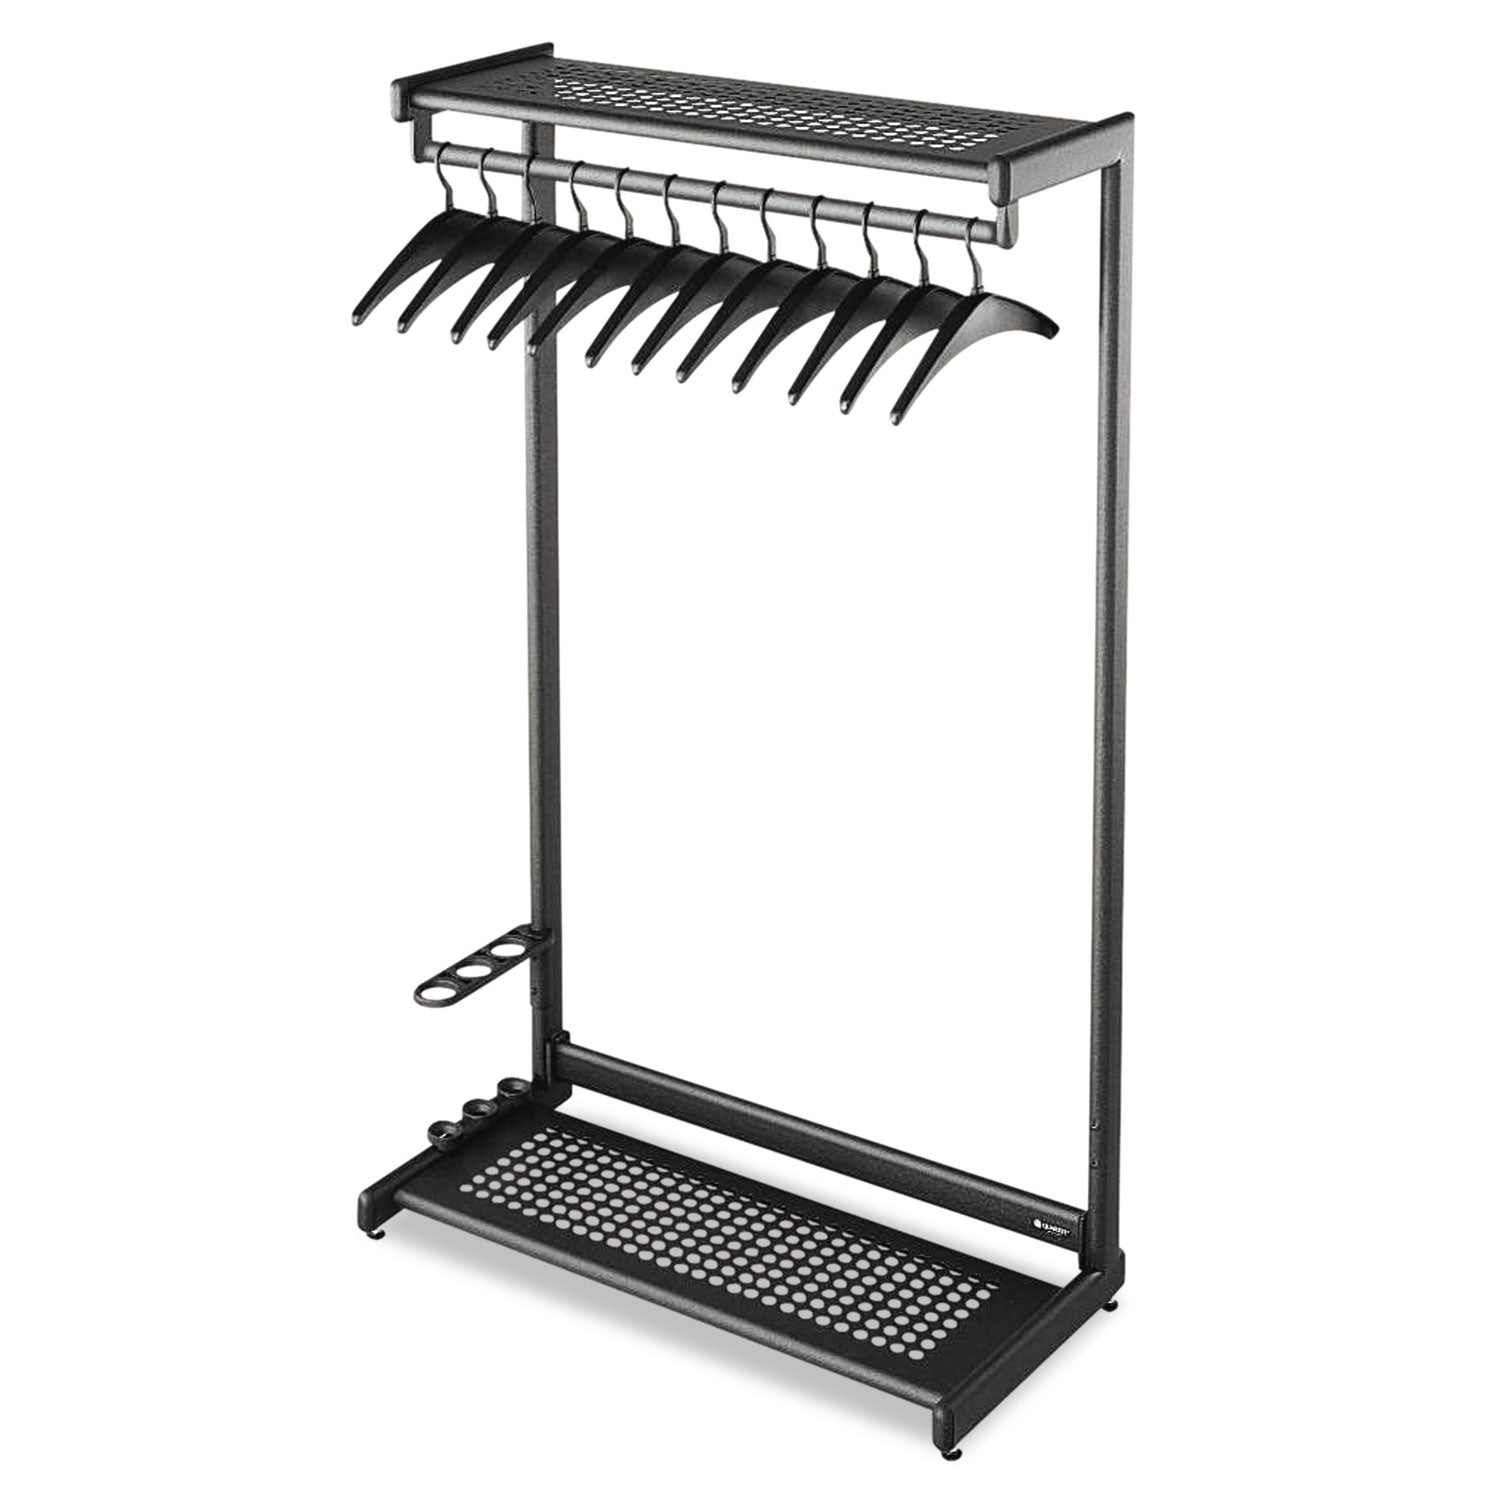 Single-Sided Rack with Two Shelves, 12 Hangers, Steel, 48w x 18.5d x 61.5h, Black - 